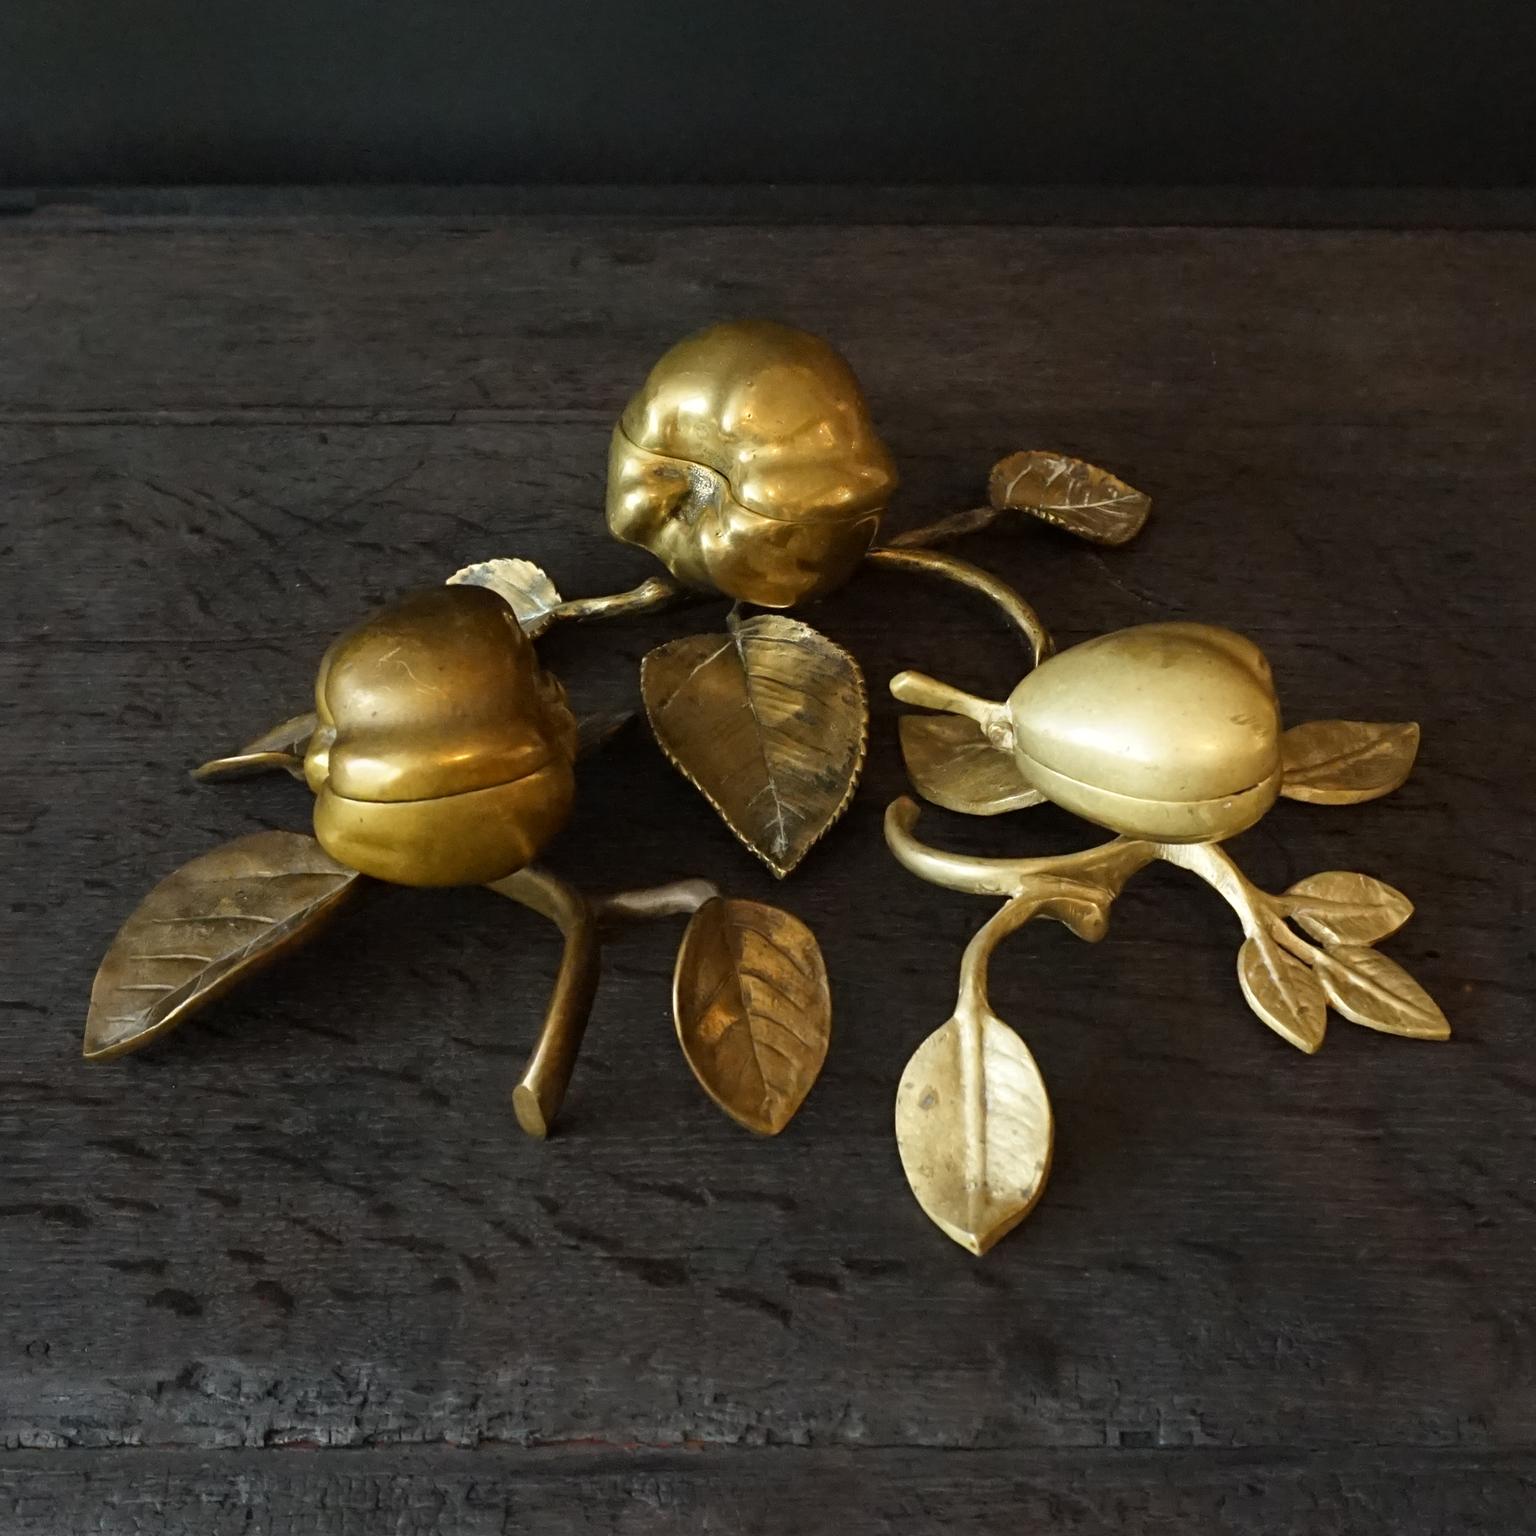 Antique hinged bronze patinated apples and a pear trinket boxes on a twig with leaves, to keep or collect your little trinkets in.
They used to be called bed-apple or bed-pear, and they were used for putting your jewellery in on your nightstand